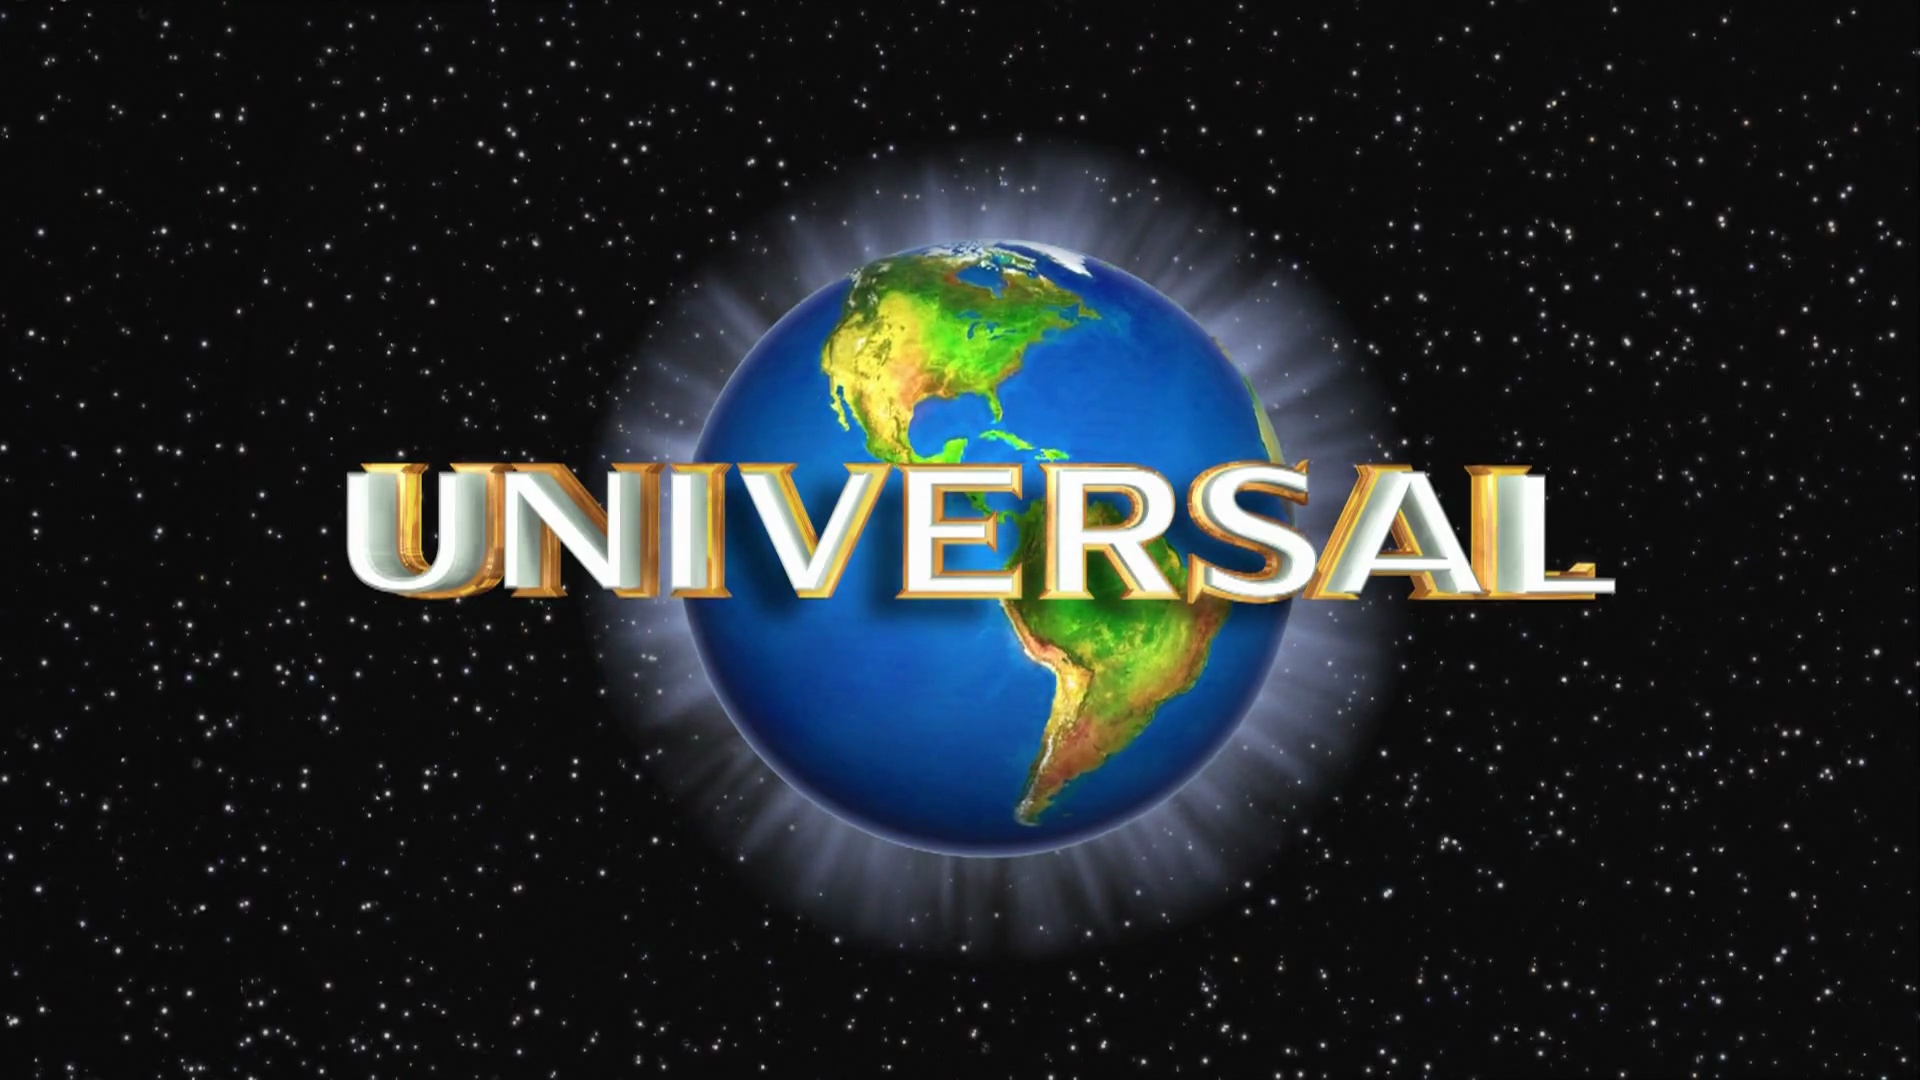 Universal Pictures will release Ultra HD BluRay movies this Summer